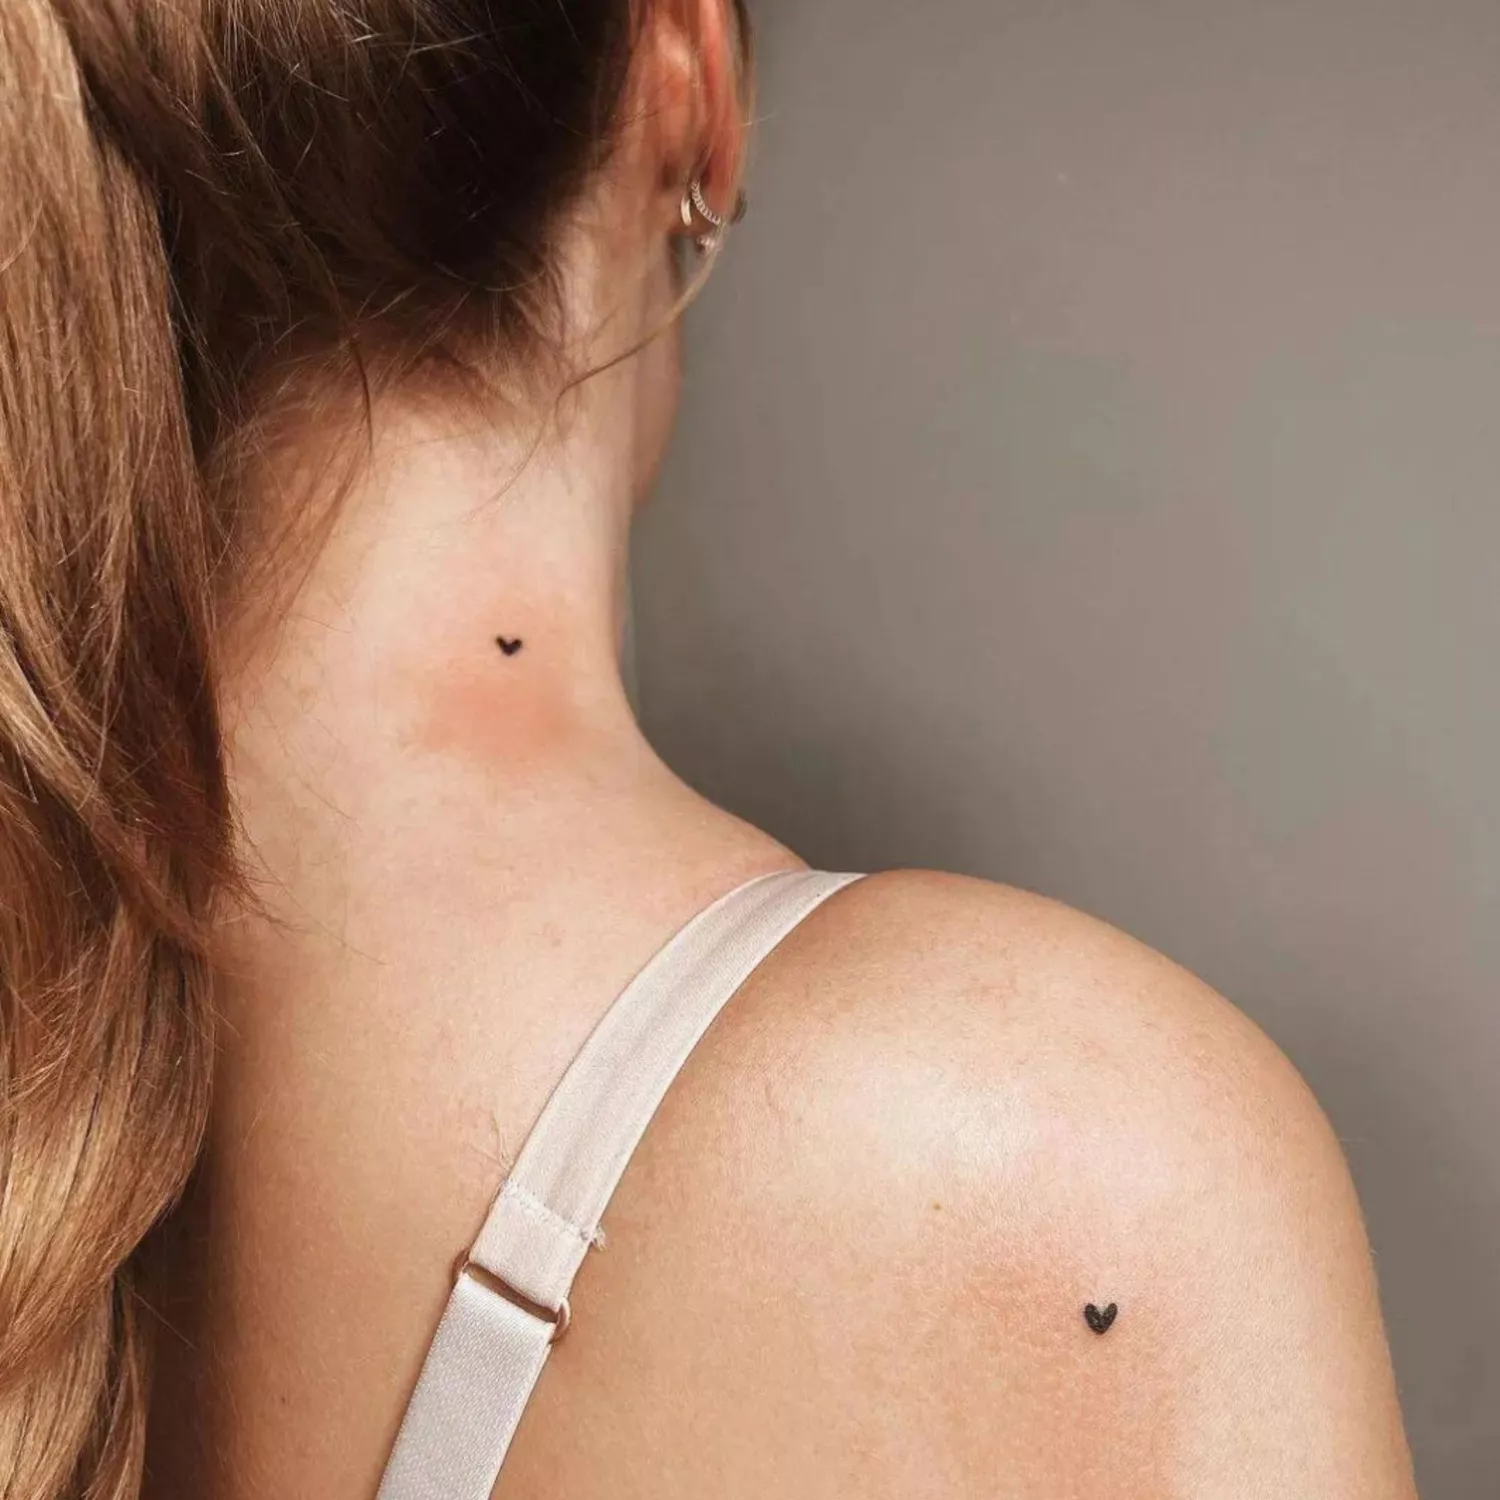 Two tiny heart tattoos on the neck and the shoulder, almost freckle-like.